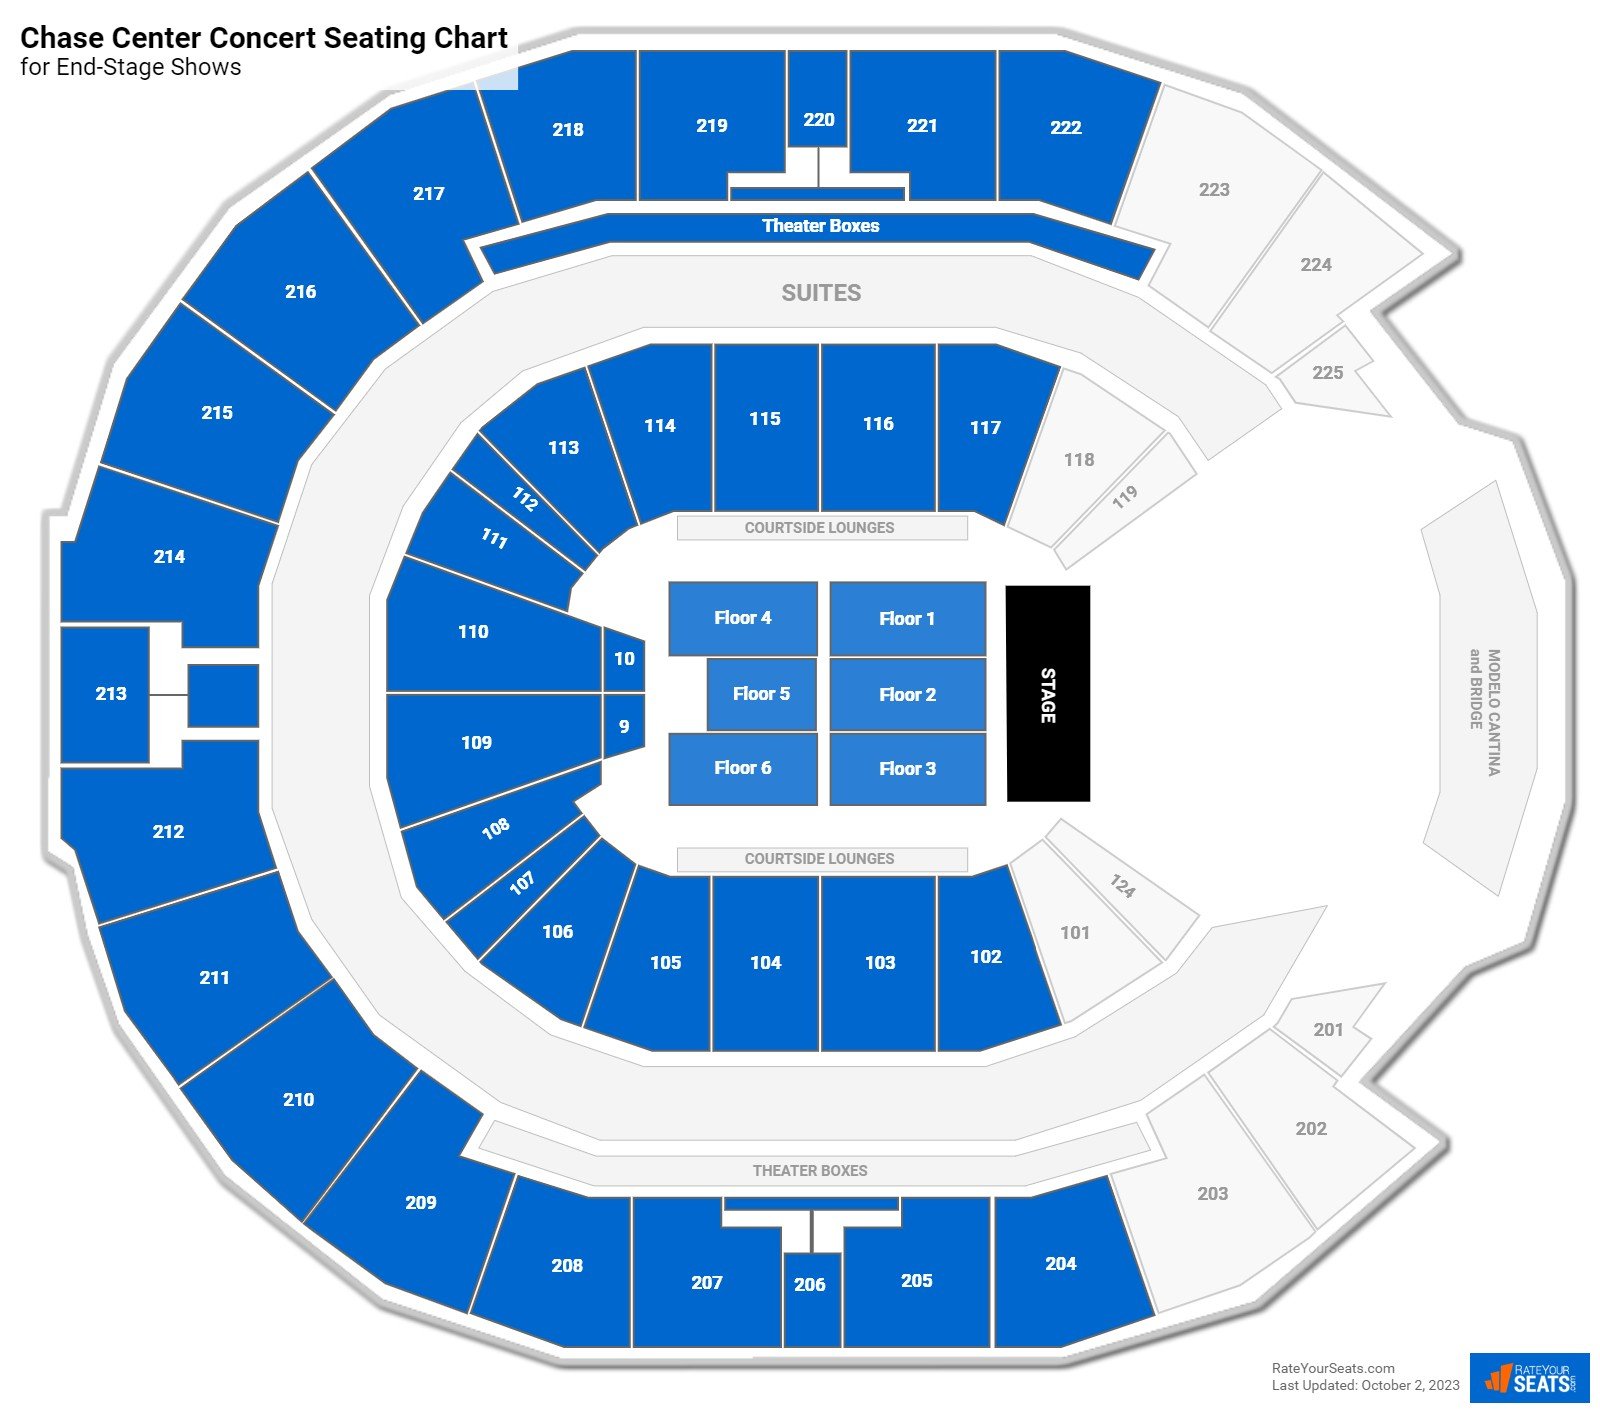 Chase Center Seating Charts For Concerts Rateyourseats Com